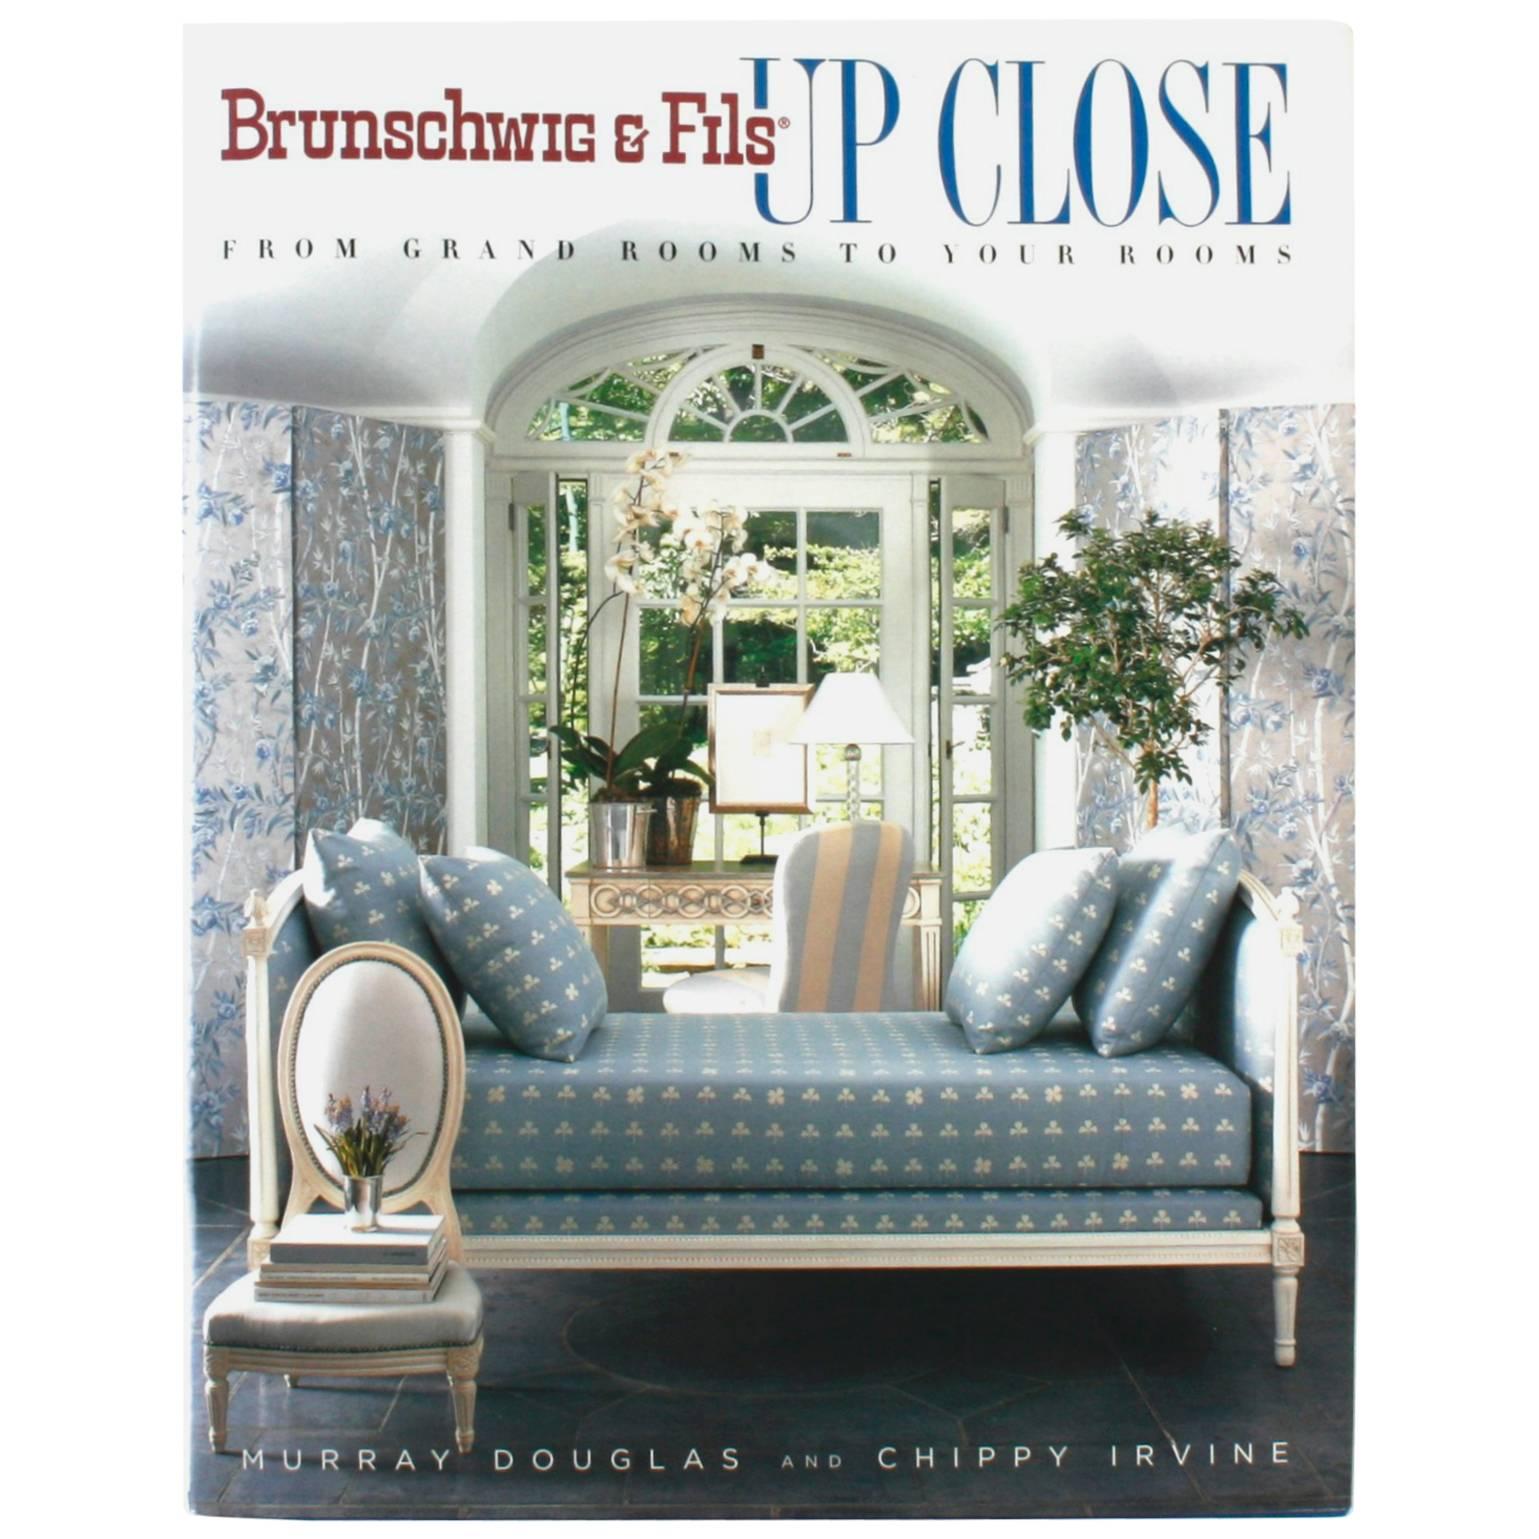 Brunschwig & Fils Up Close, from Grand Rooms to Your Rooms, First Edition